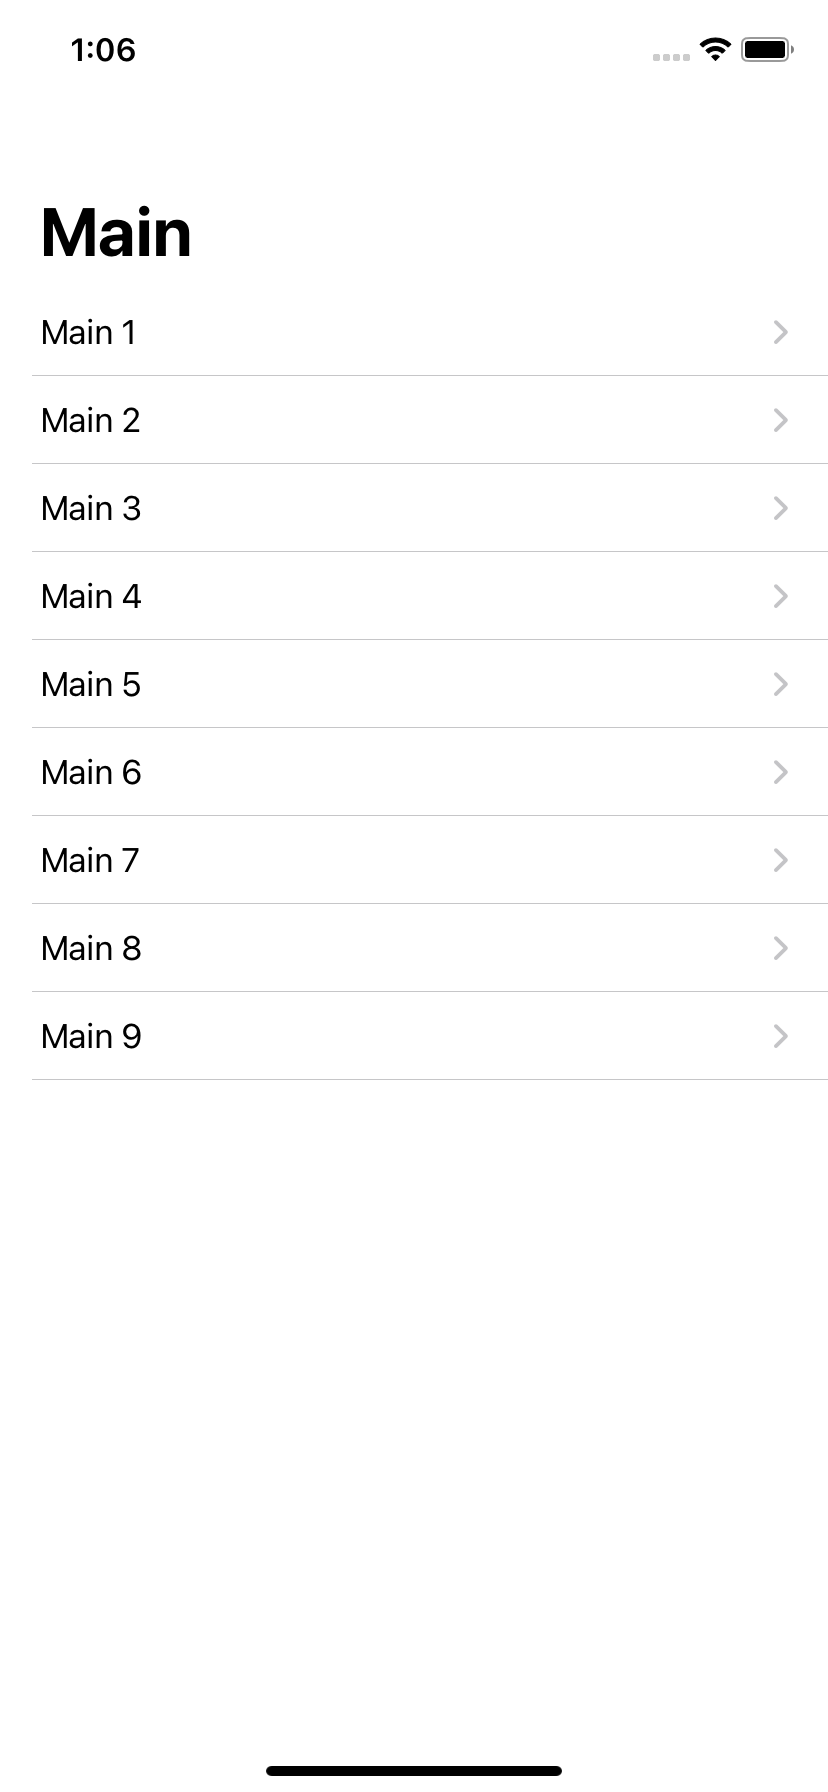 The table view containing rows Main 1, Main 2, ... Main 9 with nav links in all rows